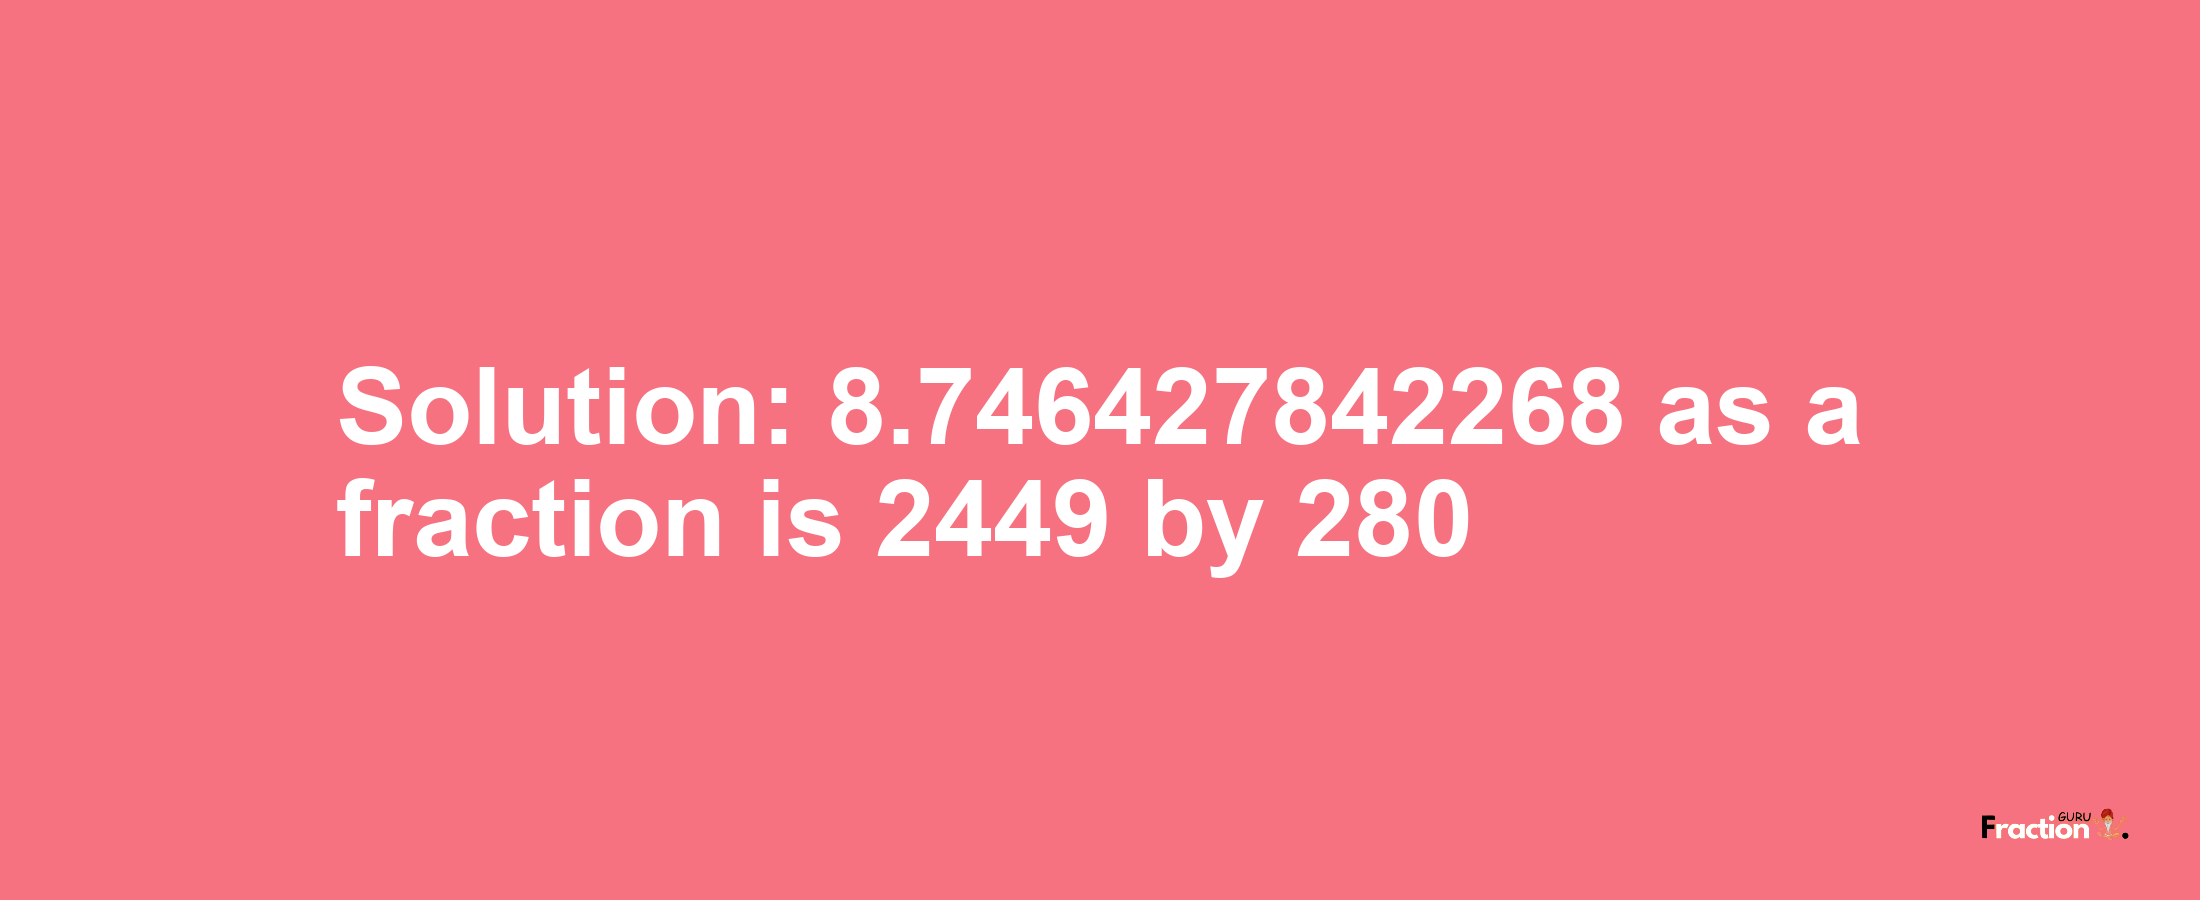 Solution:8.746427842268 as a fraction is 2449/280